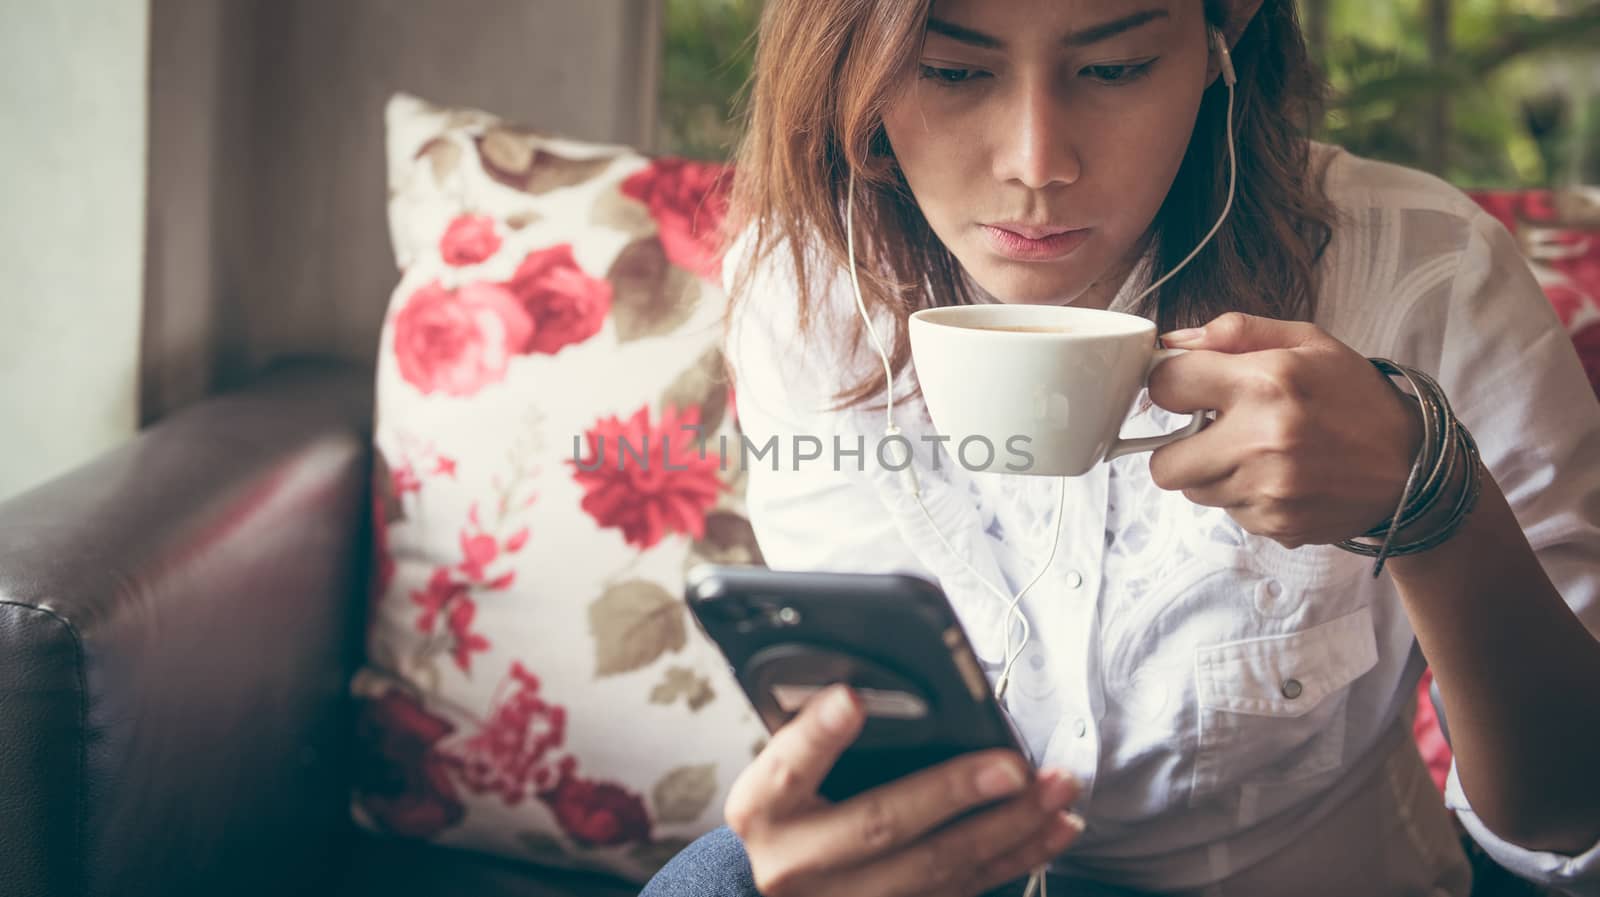 Woman drinking coffee in a cafe Vintage style photo,Focus on face